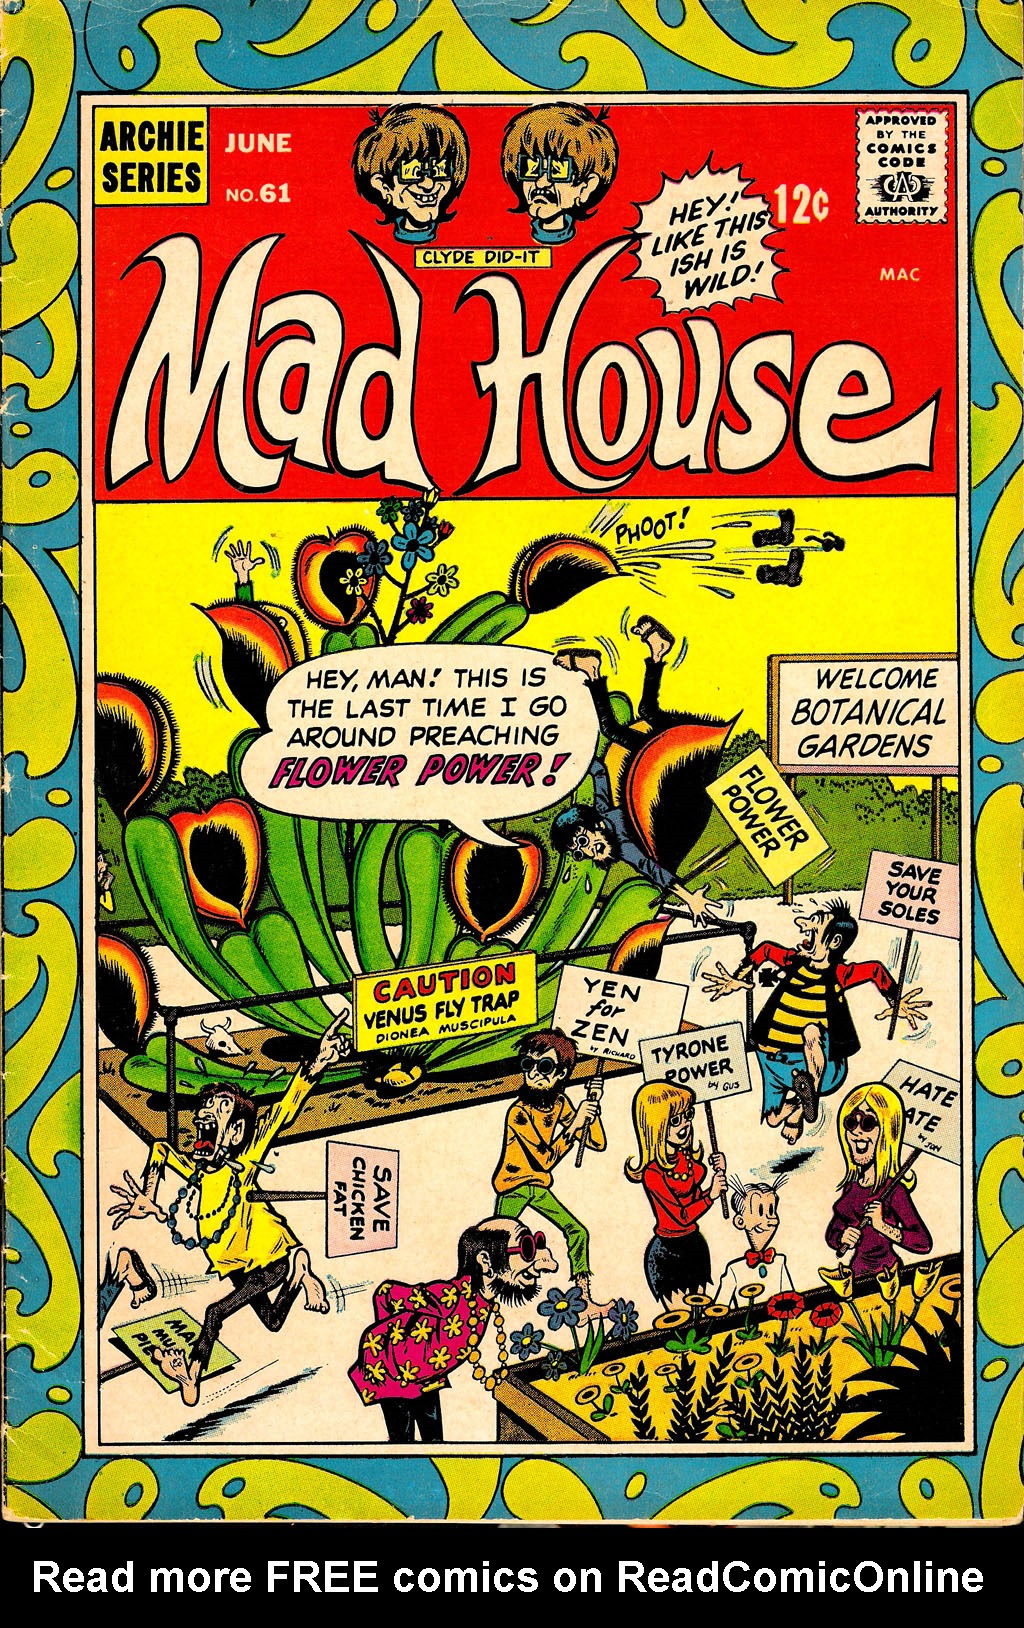 Read online Archie's Madhouse comic -  Issue #61 - 1